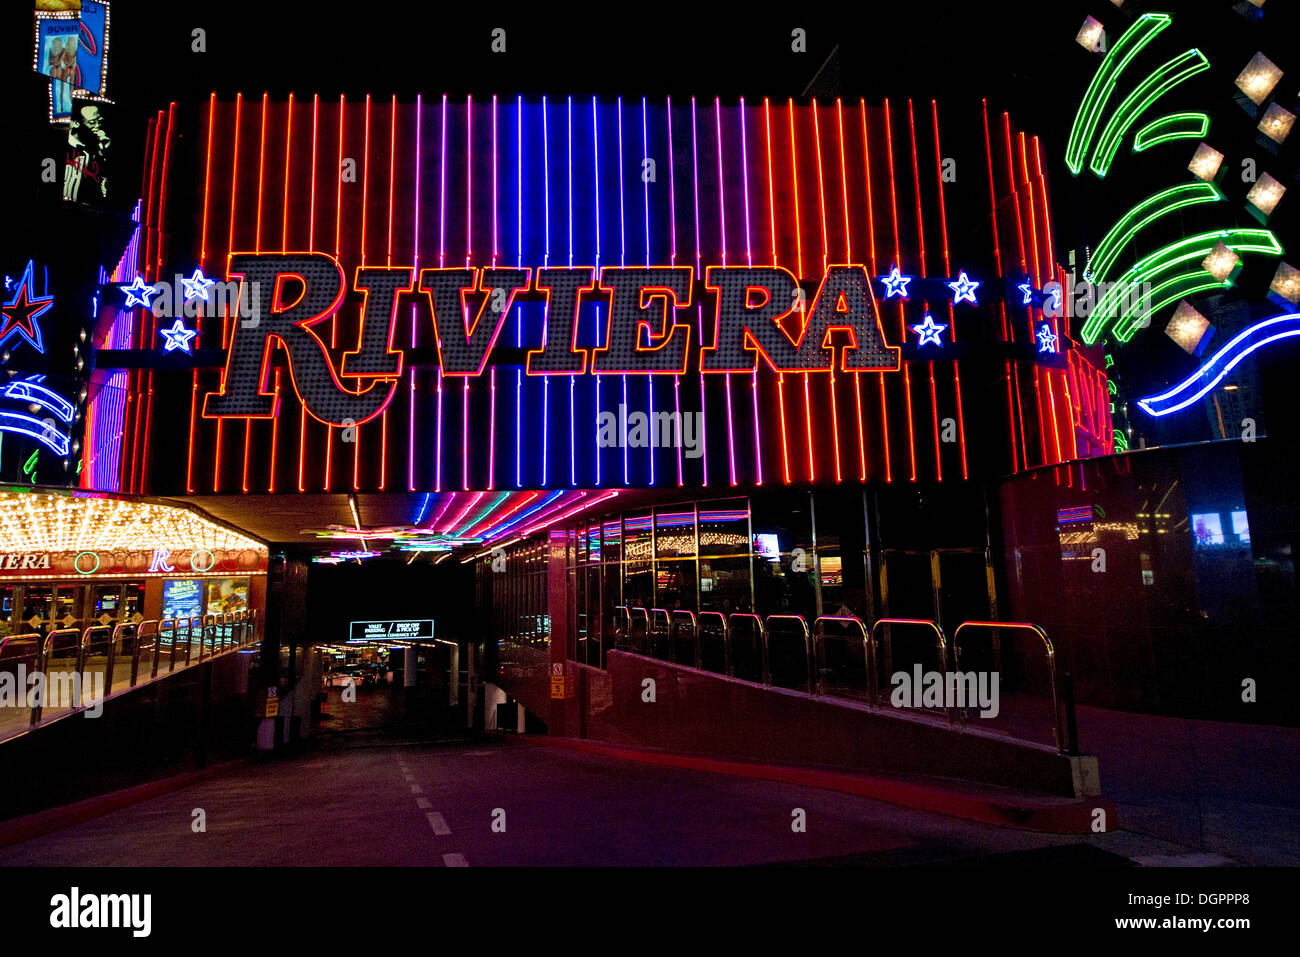 Photos: Looking back at the iconic Riviera Hotel and Casino, National News